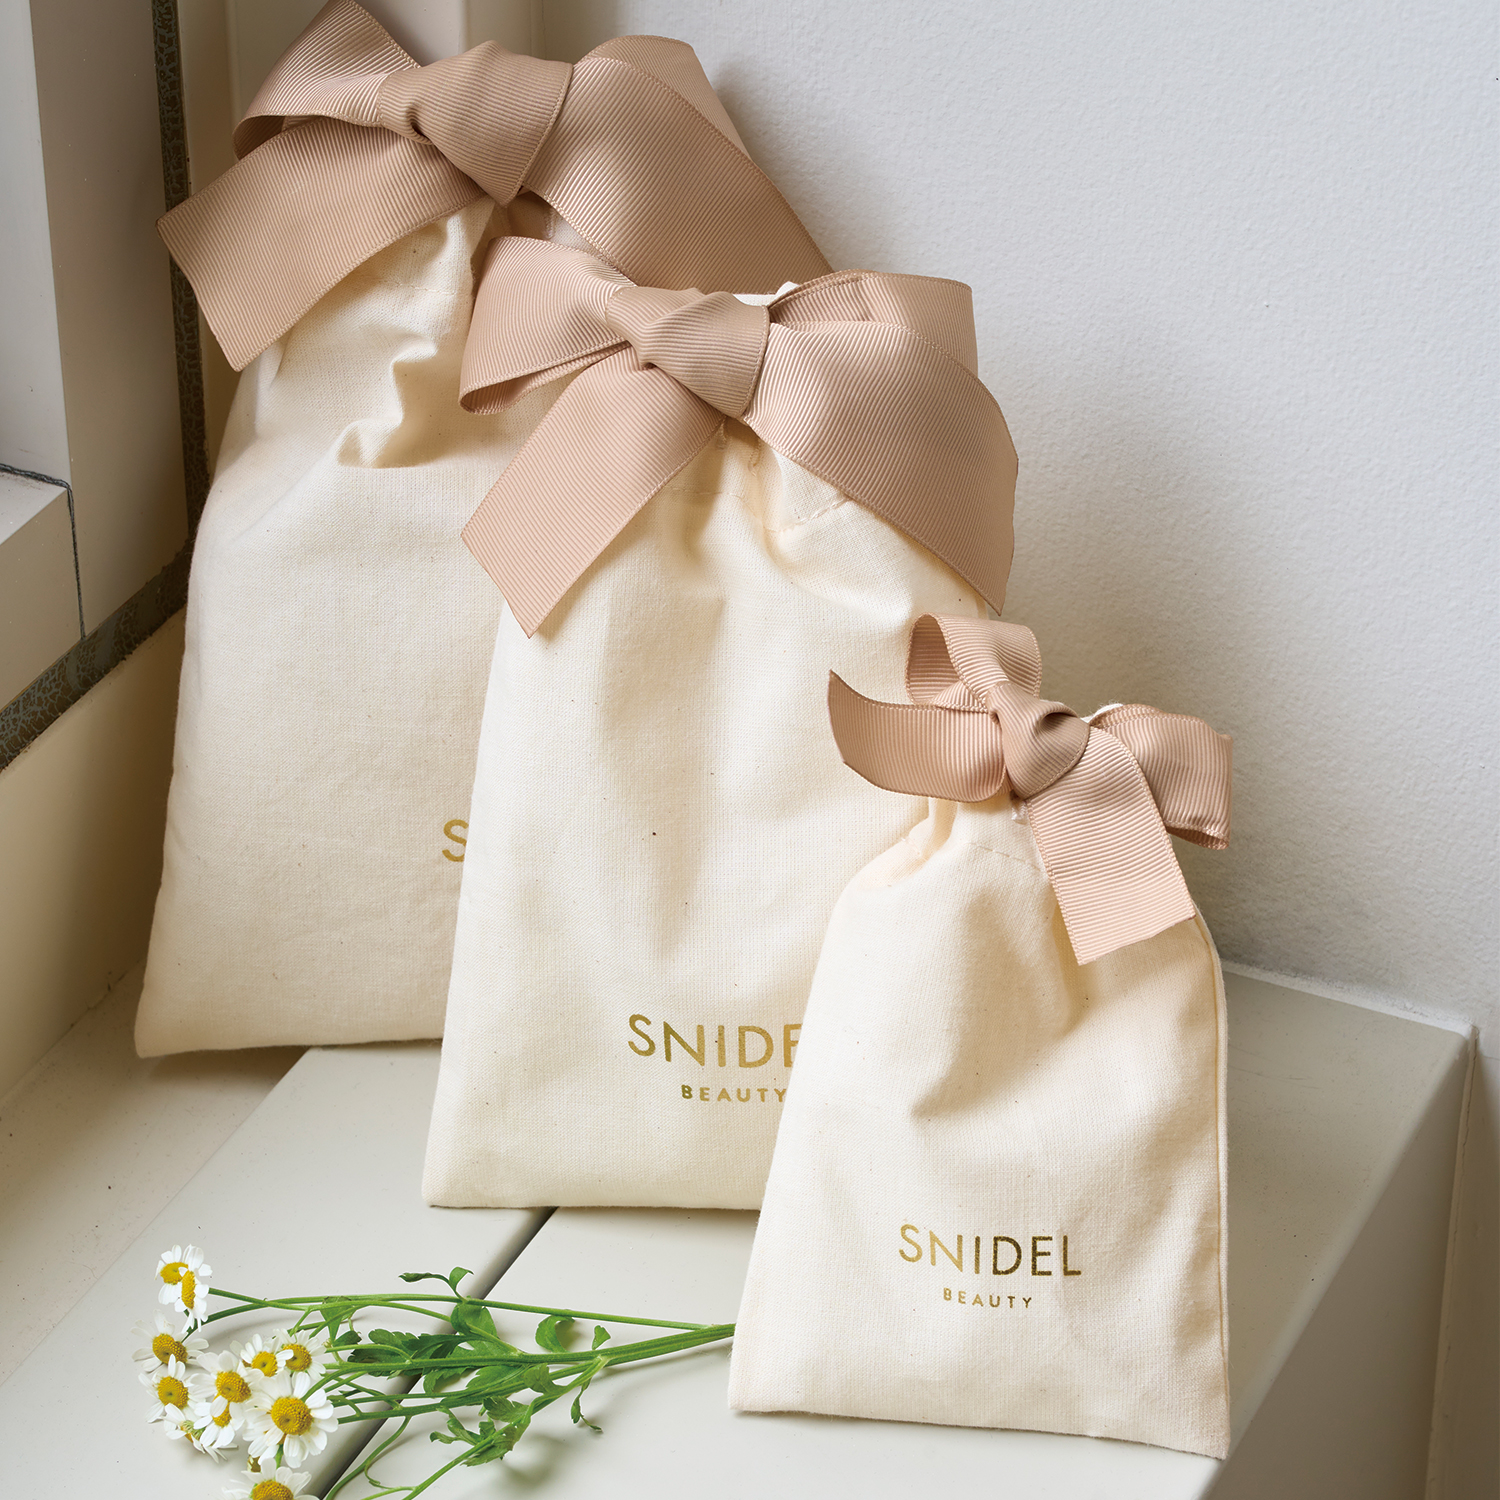 SNIDEL BEAUTY】ギフトラッピング巾着 S ｜OTHER その他｜SNIDEL BEAUTY ONLINE STORE スナイデル  ビューティオンラインストア｜SNIDEL BEAUTY ONLINE STORE スナイデル ビューティ オンラインストア